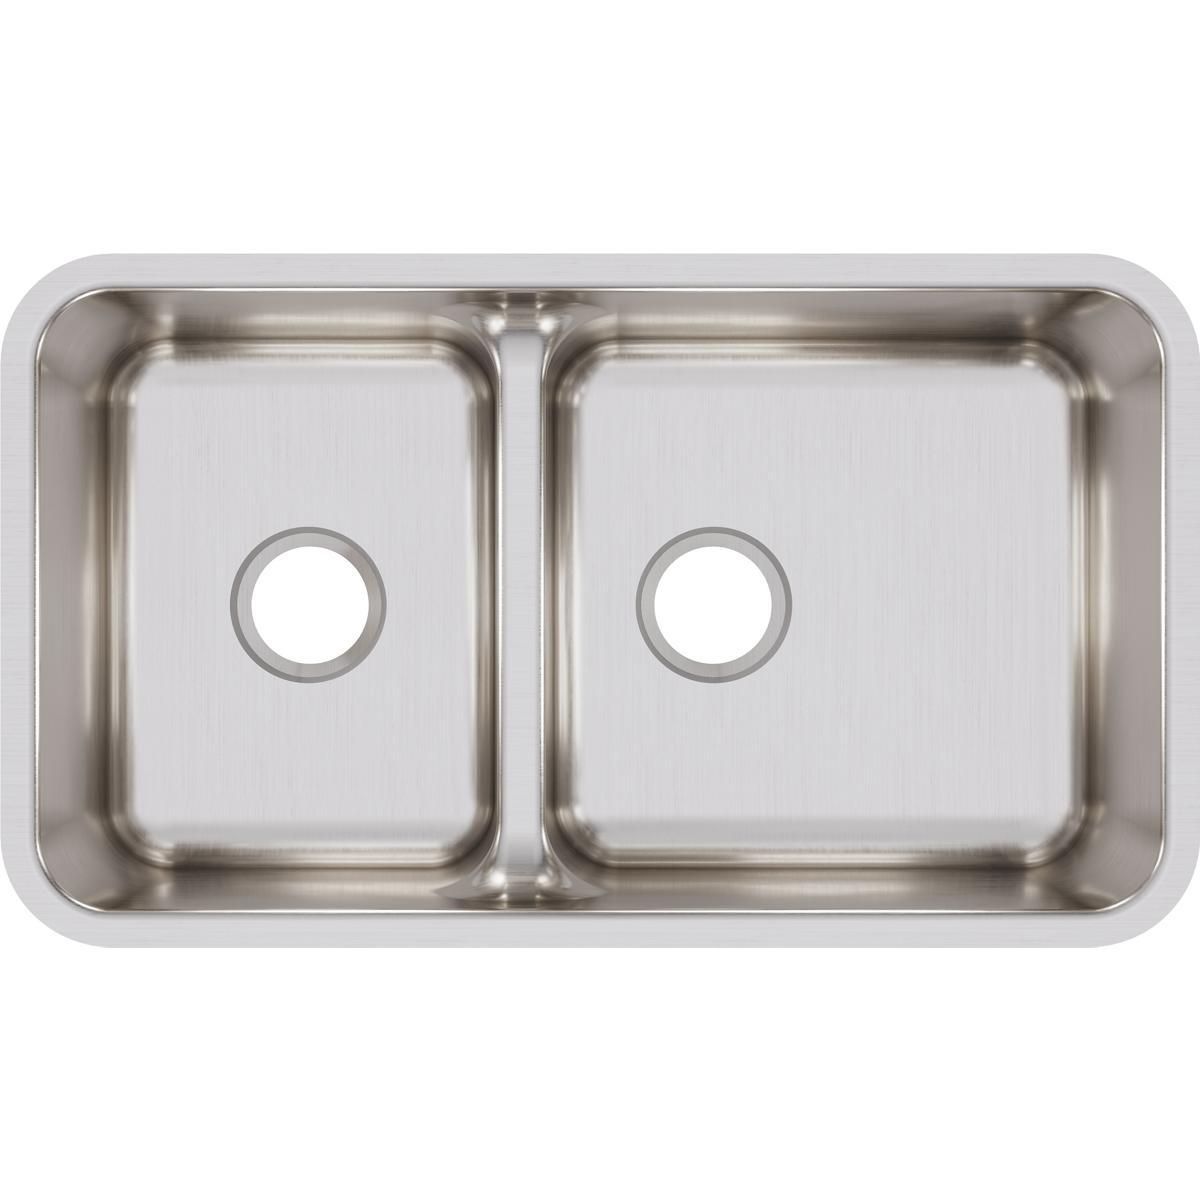 Elkay Lustertone Classic Stainless Steel 32-1/16" x 18-1/2" x 9", 40/60 Double Bowl Undermount Sink with Aqua Divide-DirectSinks